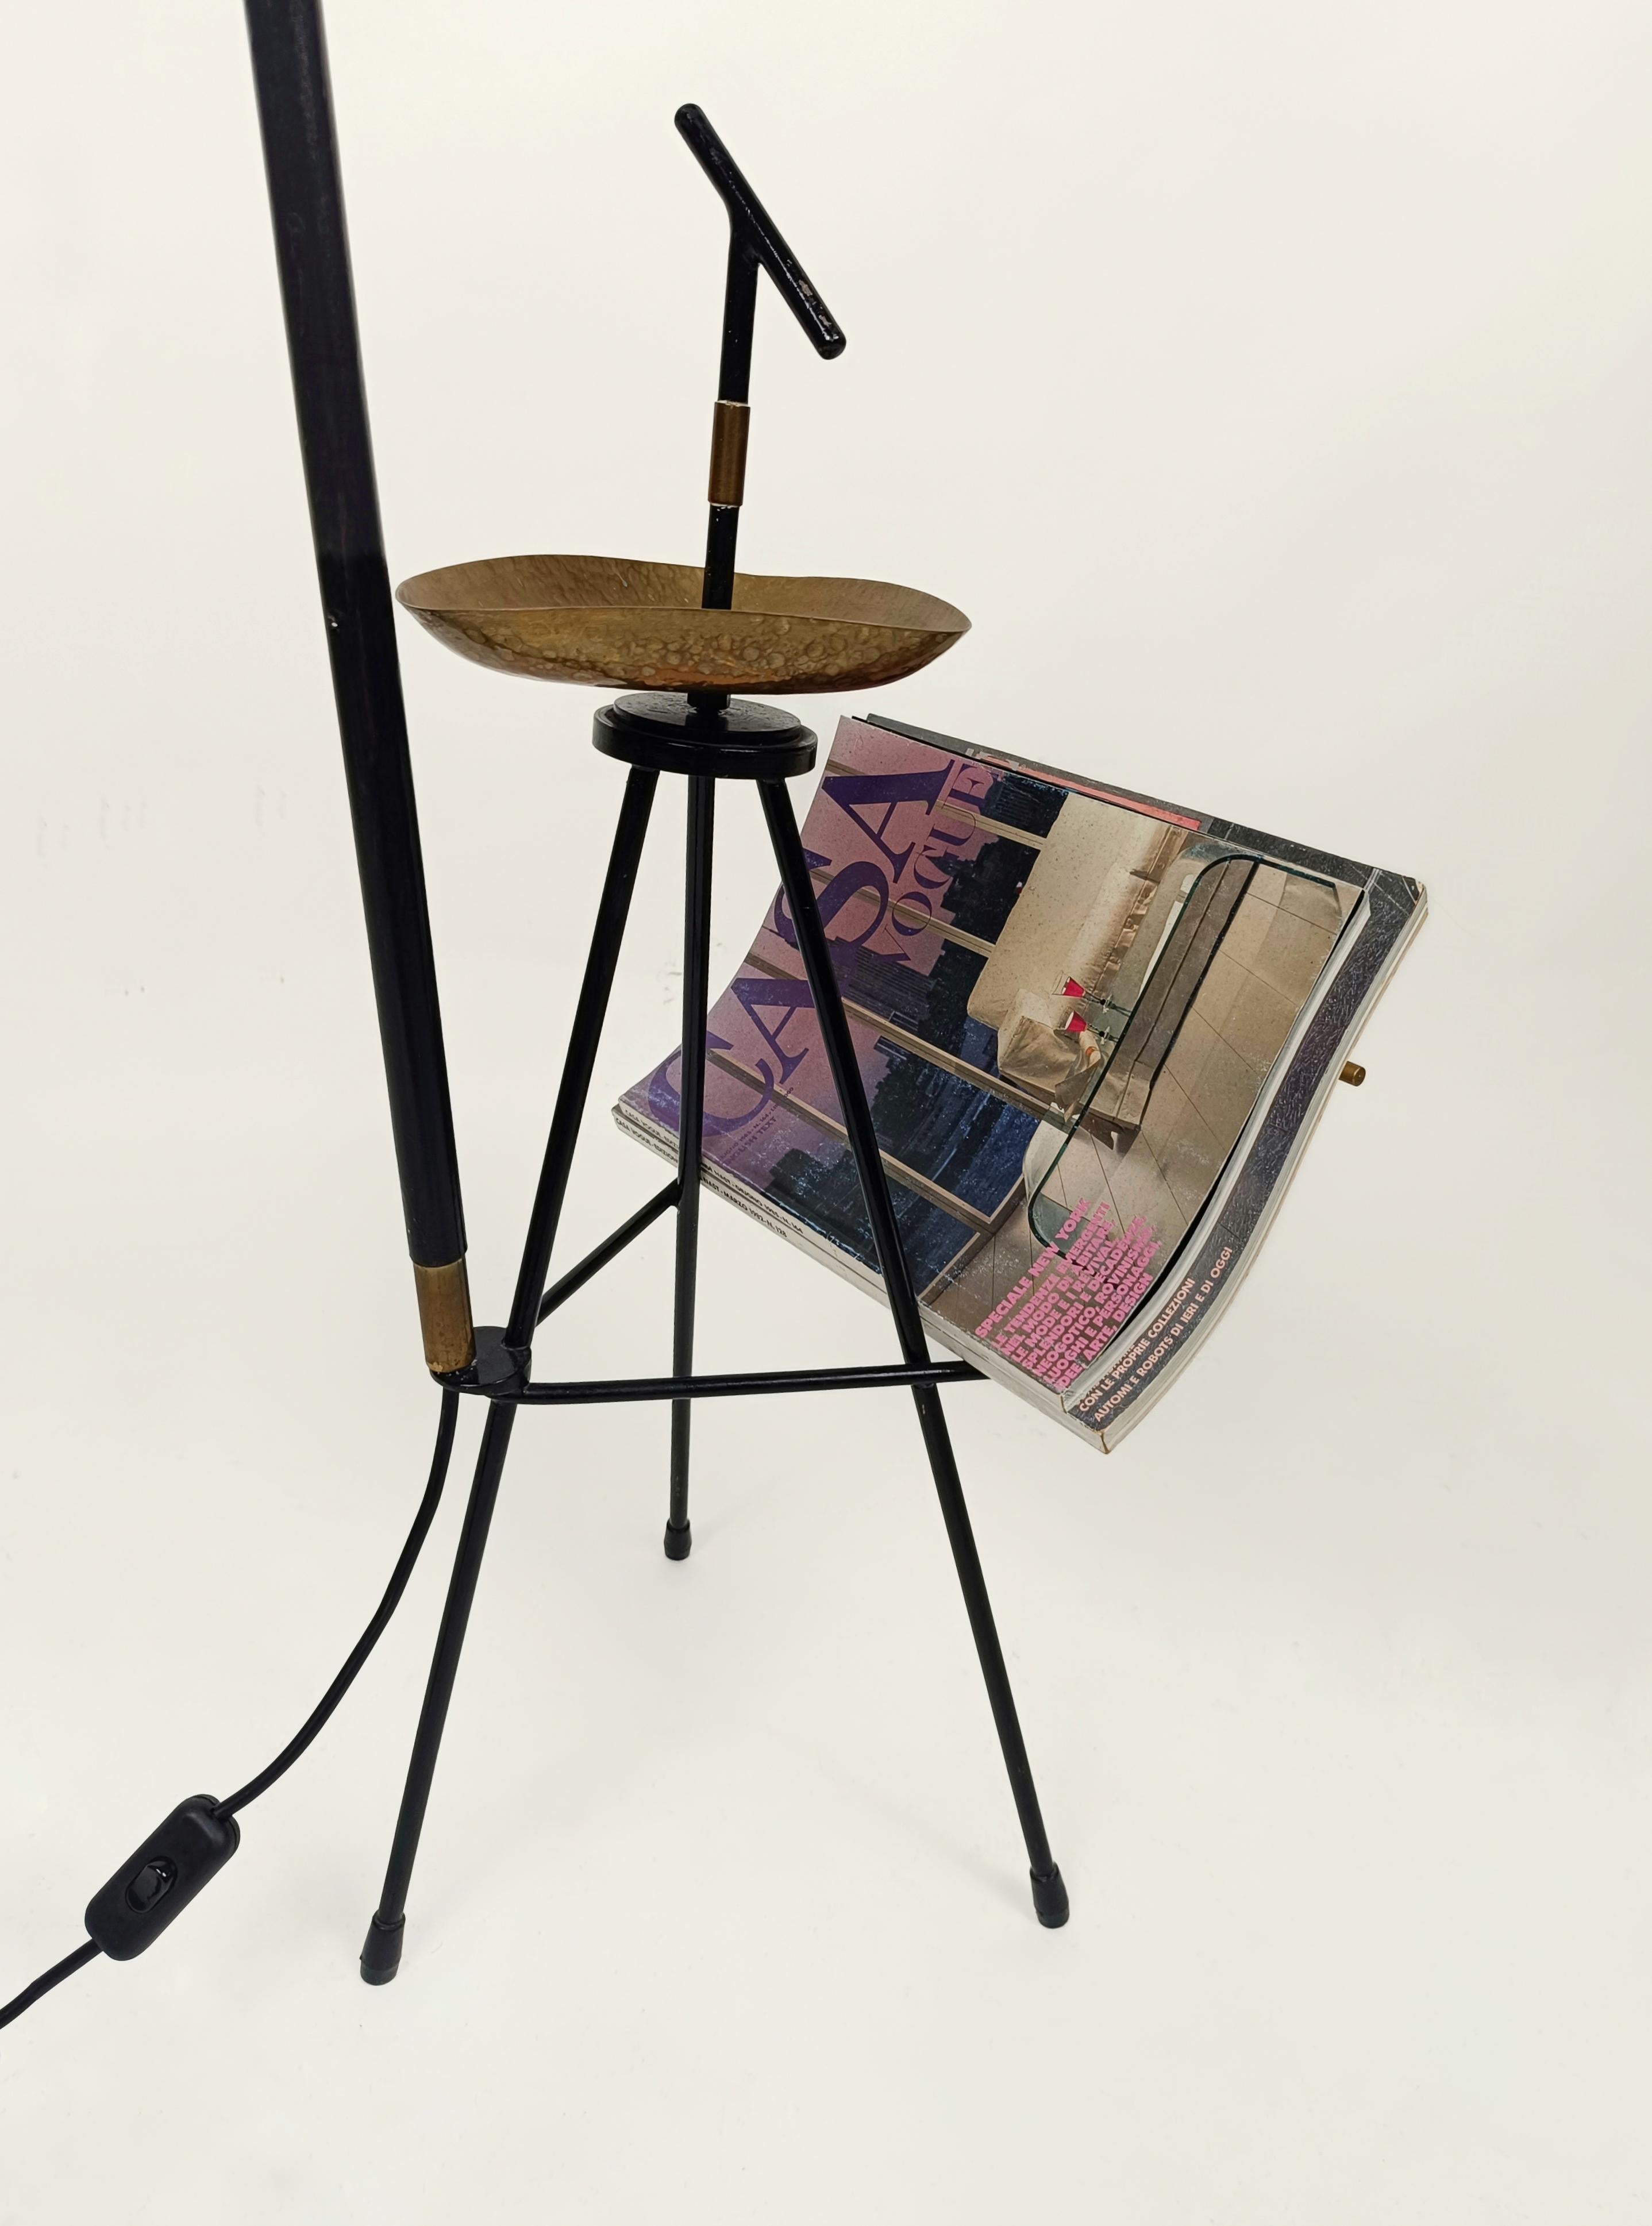 Brass Mid Century Italian Floor Lamp equipped with Ashtray and Magazine Rack, 1950s